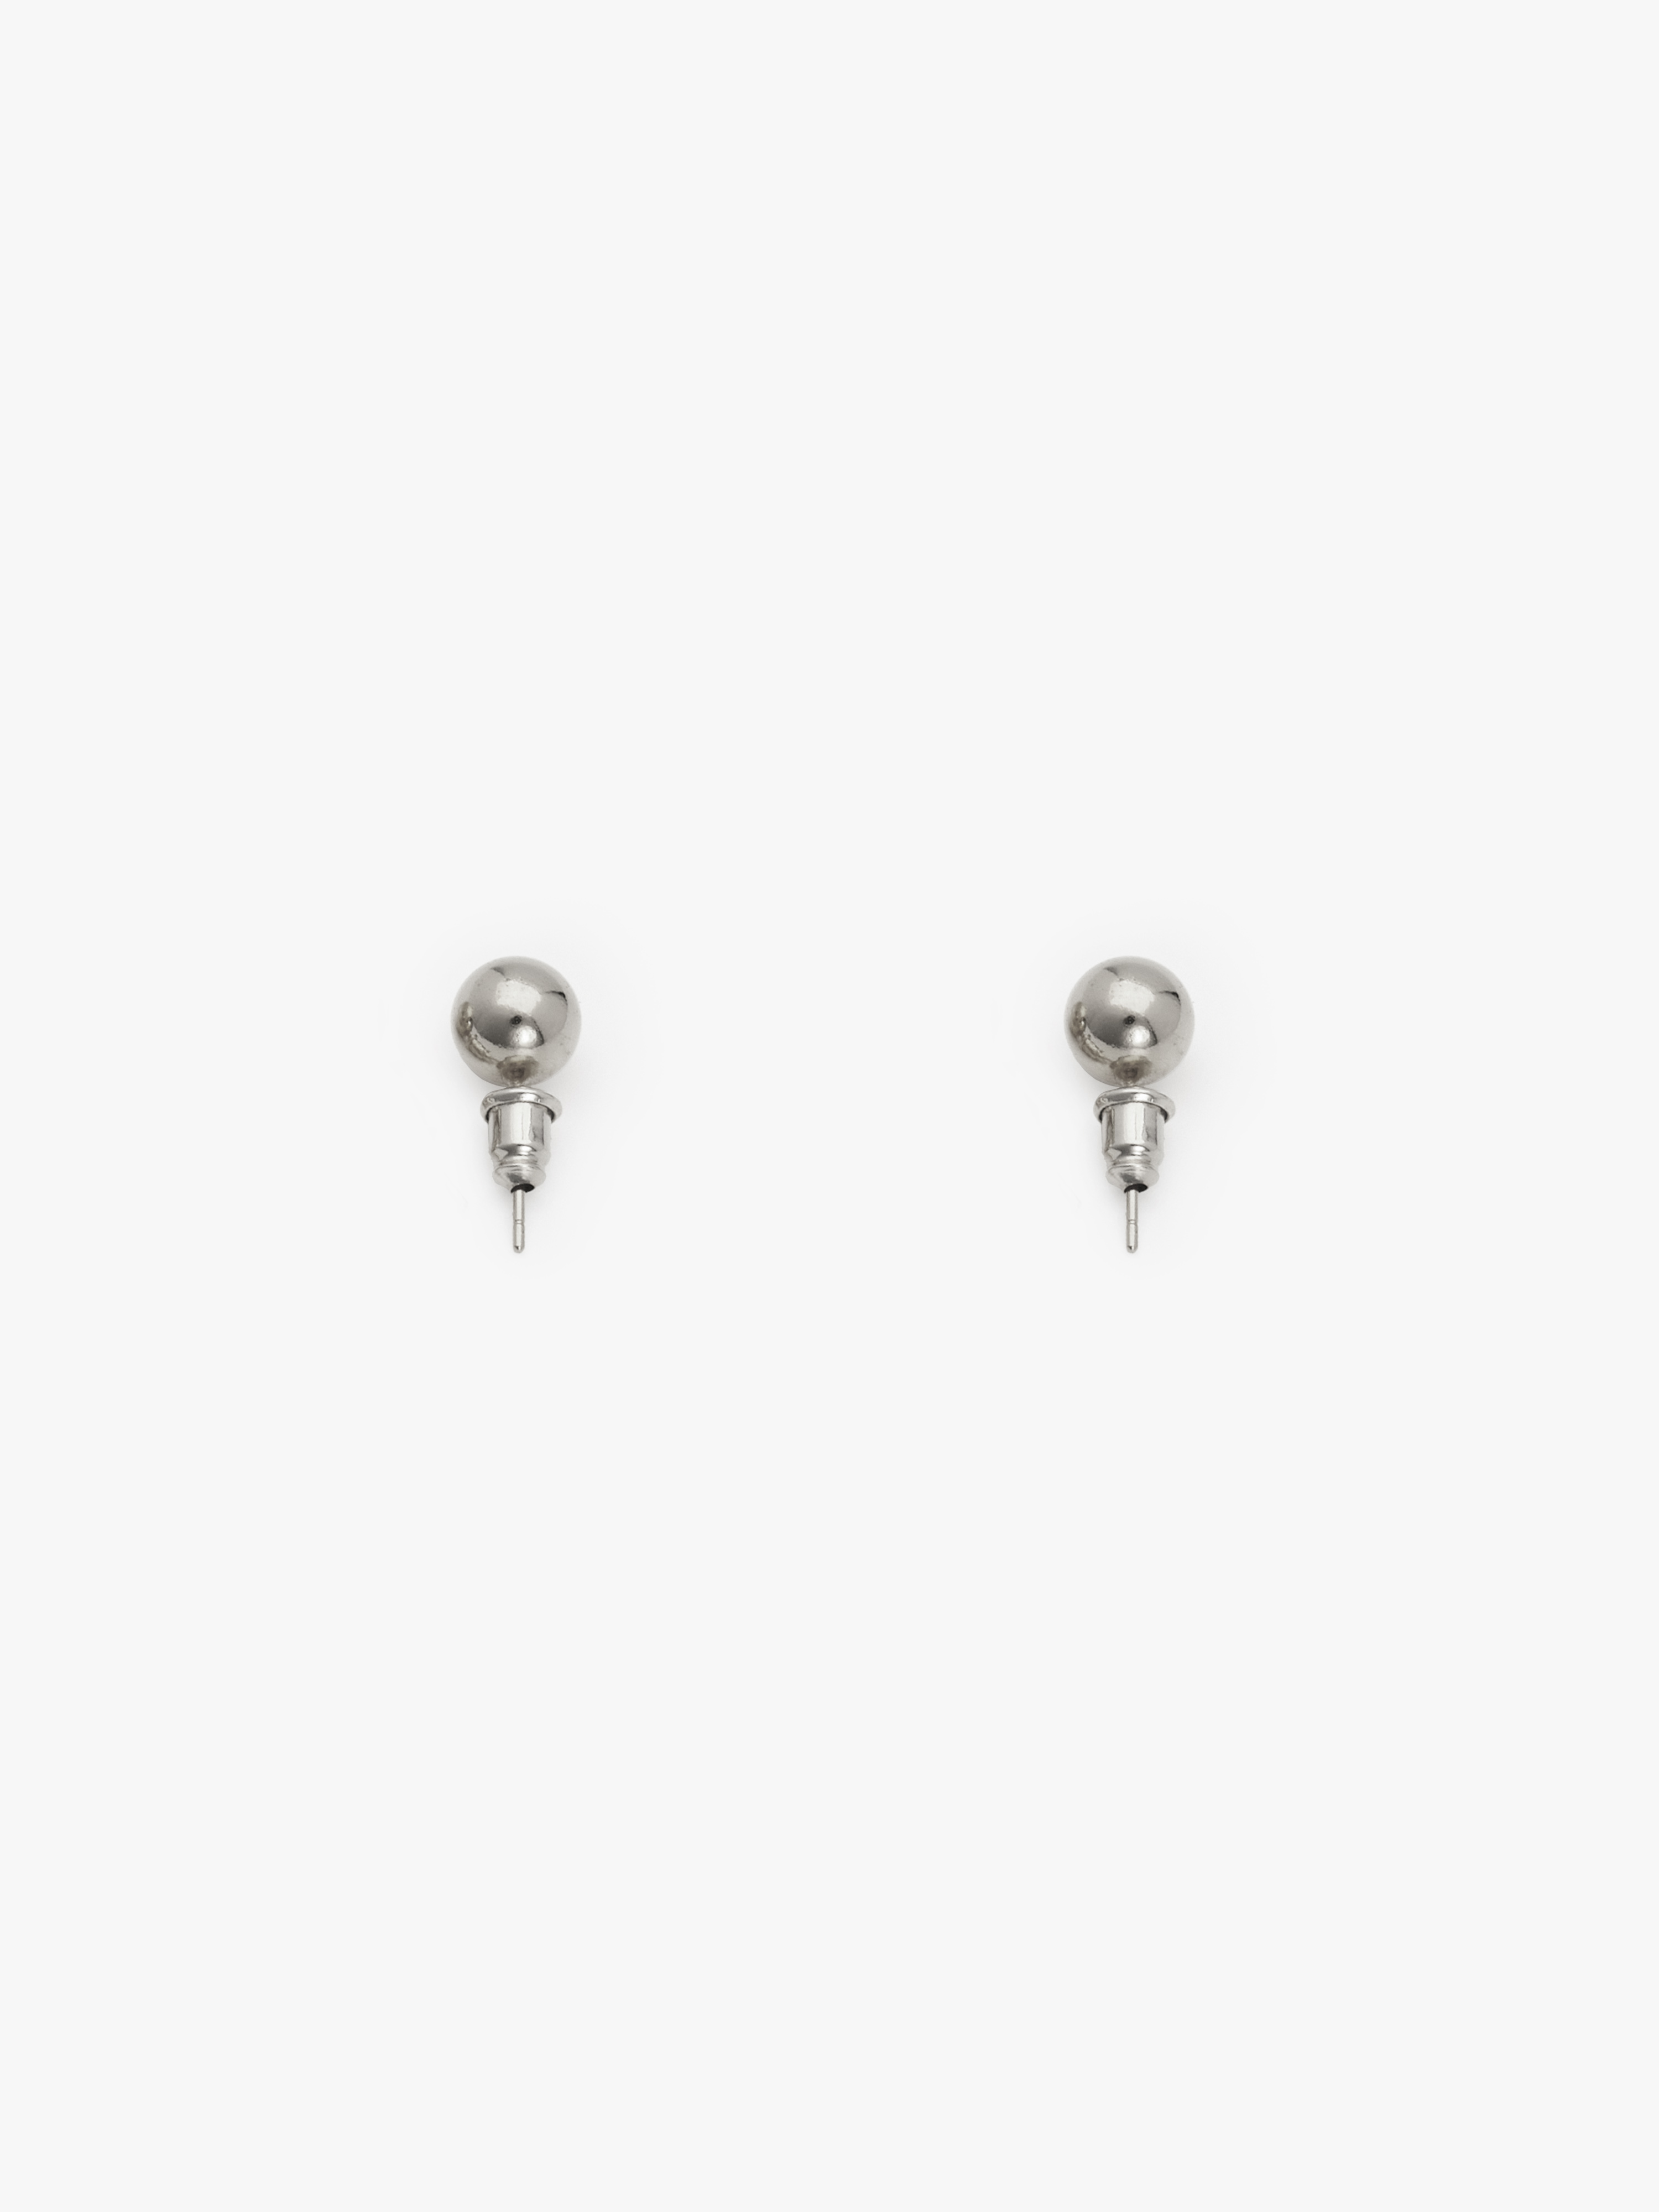 SIMPLY EARRING M / SILVER